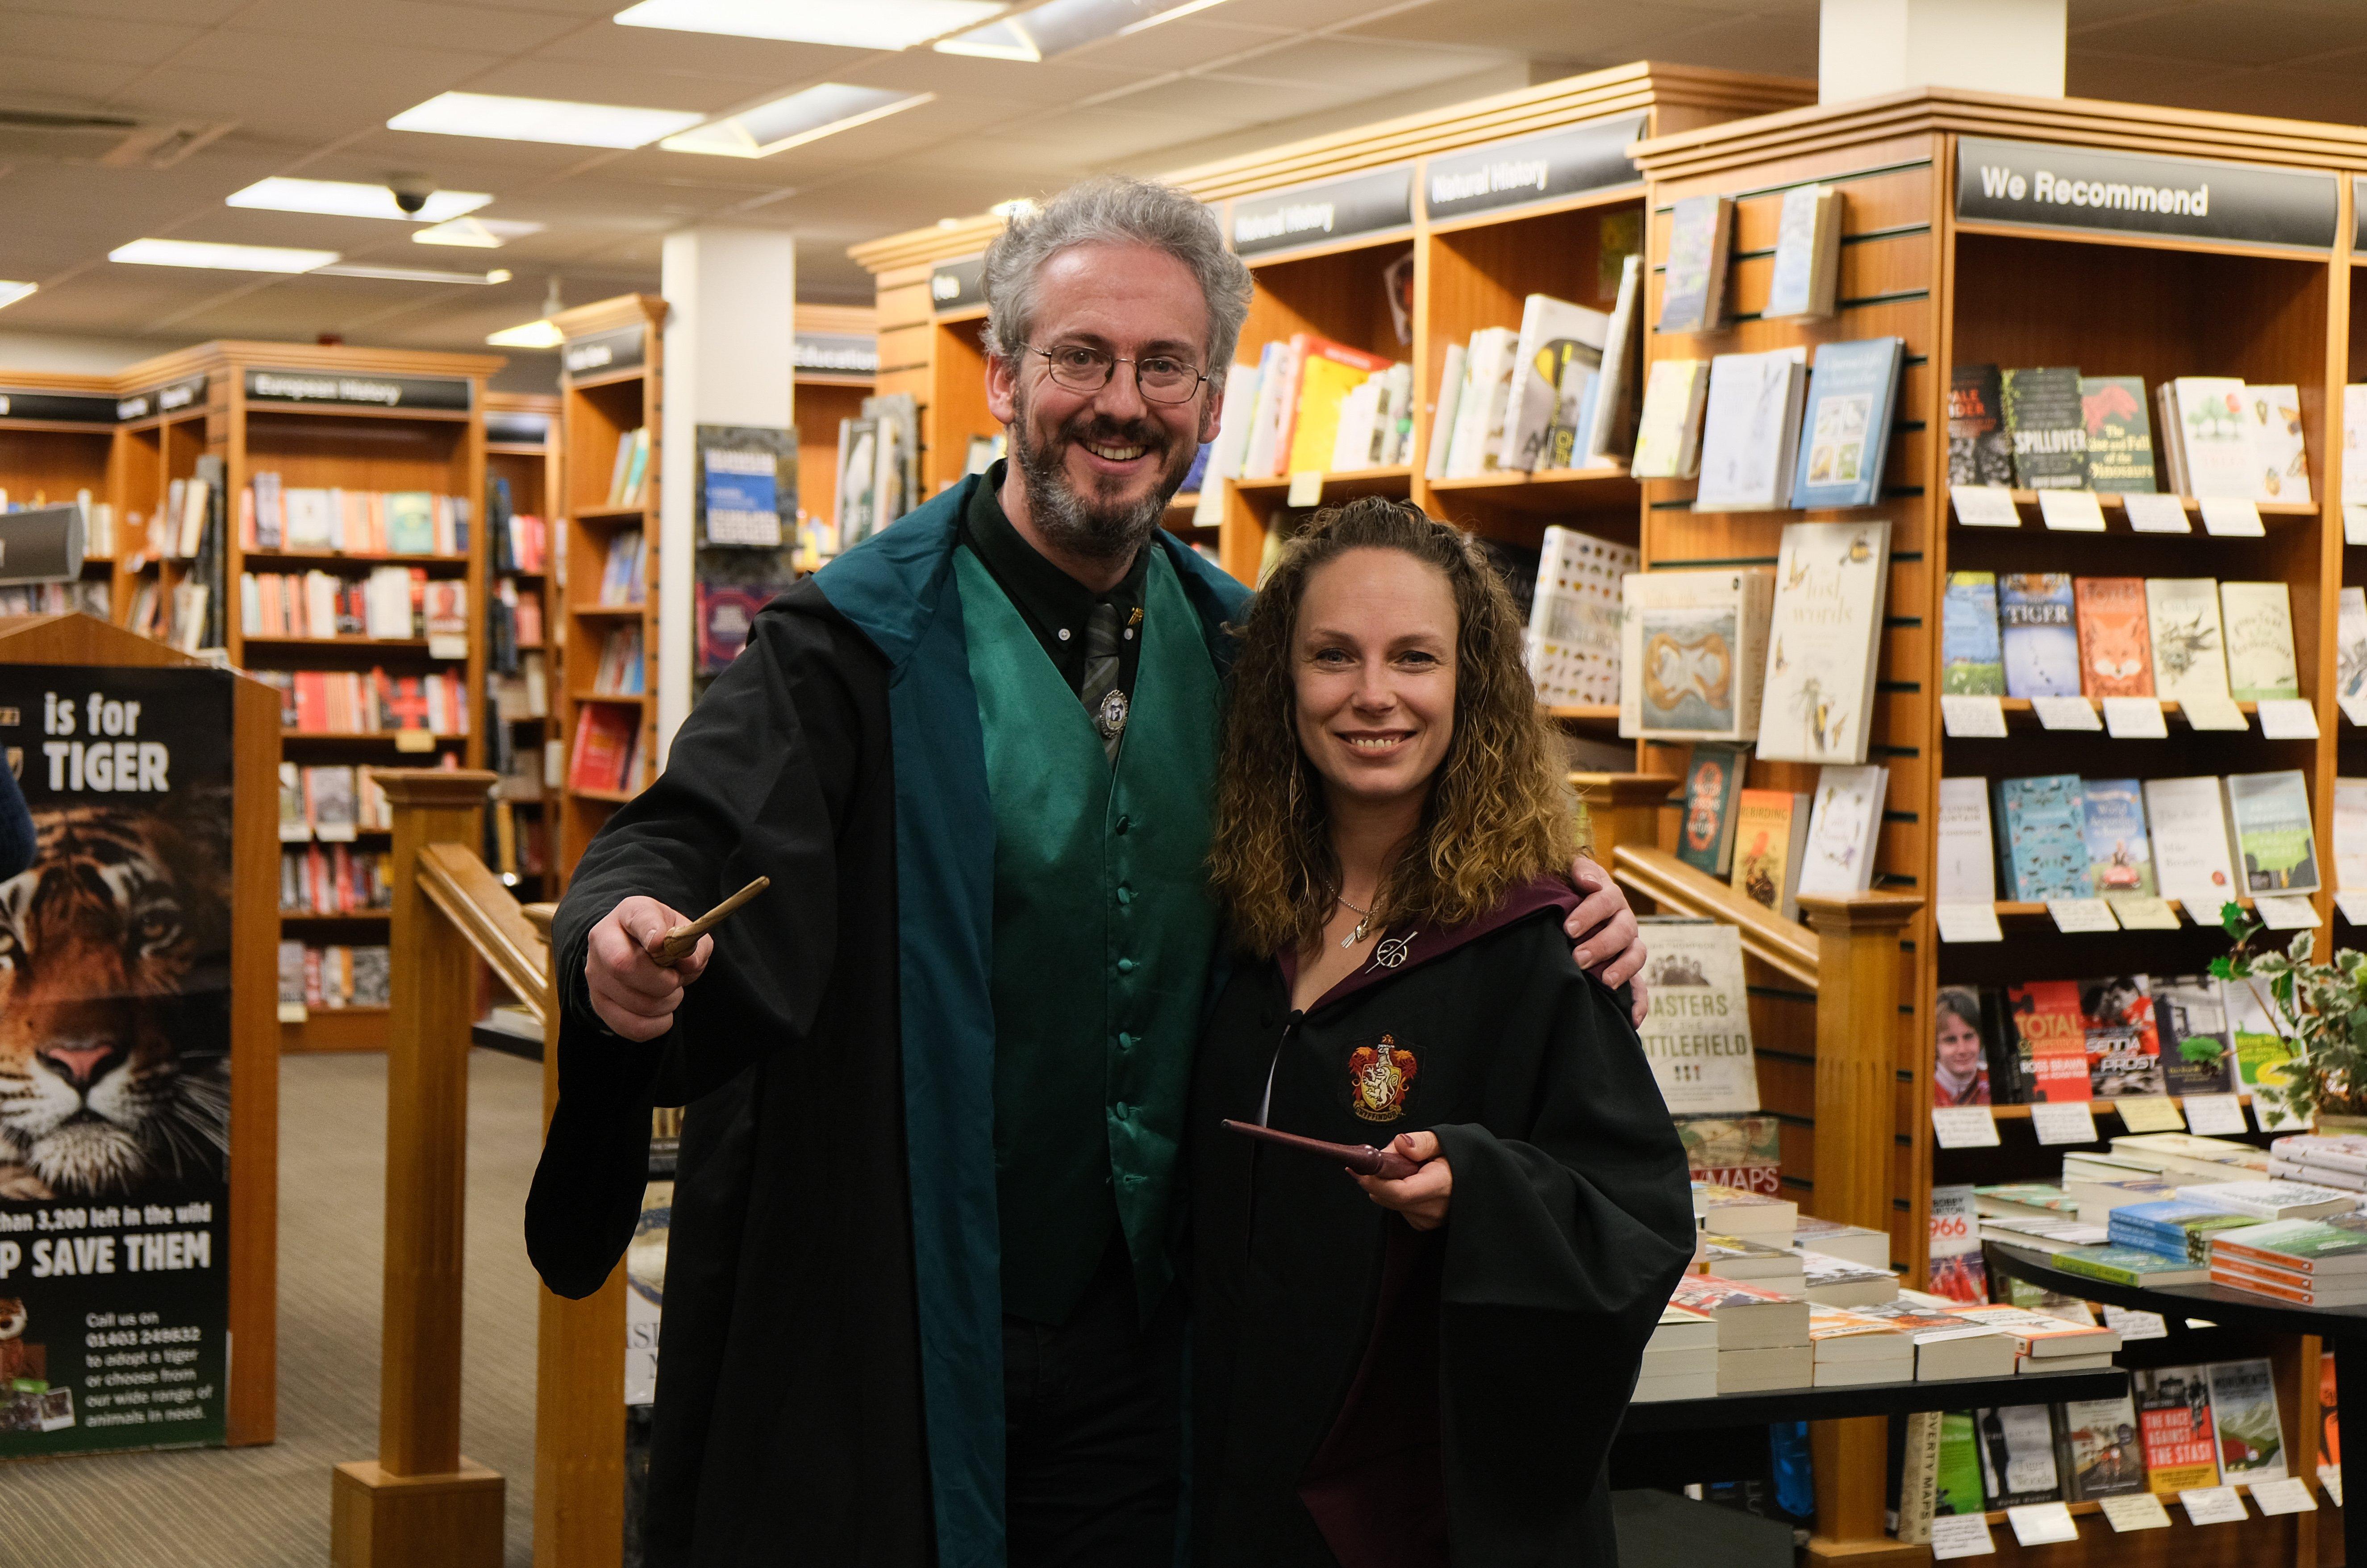 The Harry Potter Book Night at Waterstones